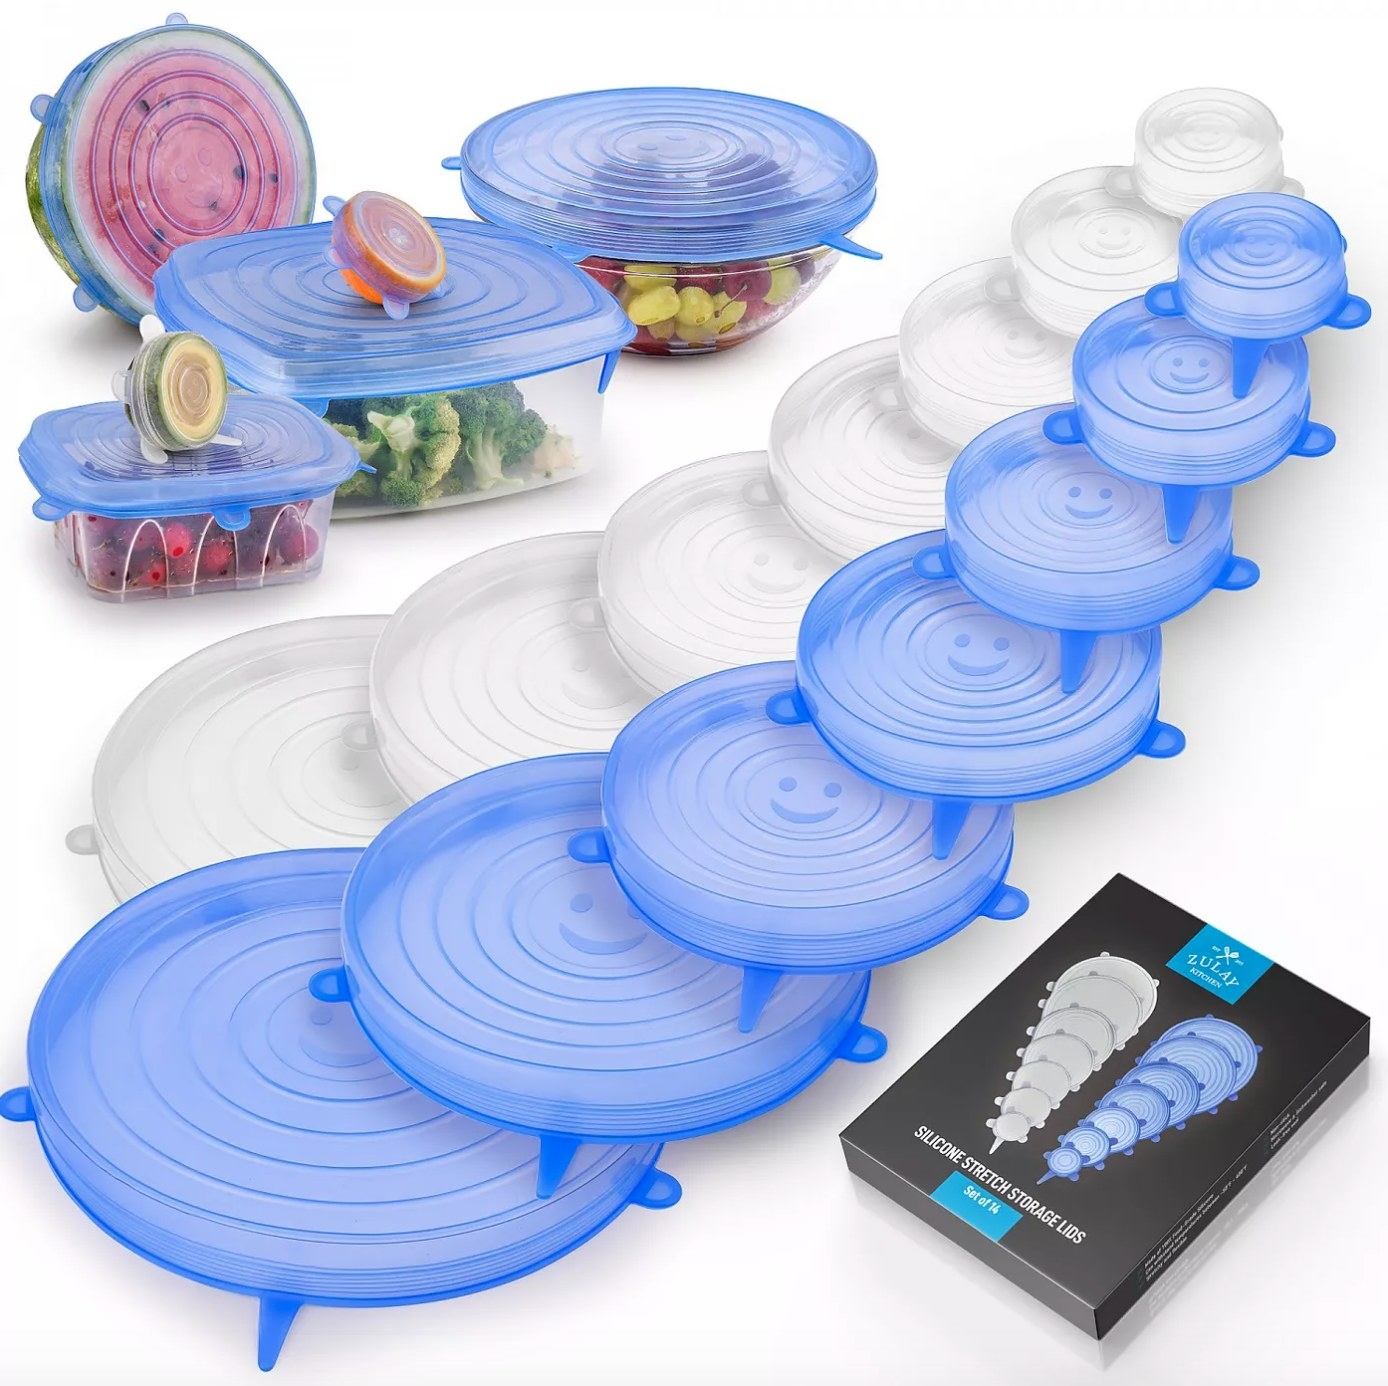 The set of 14 reusable silicone lids in blue and clear